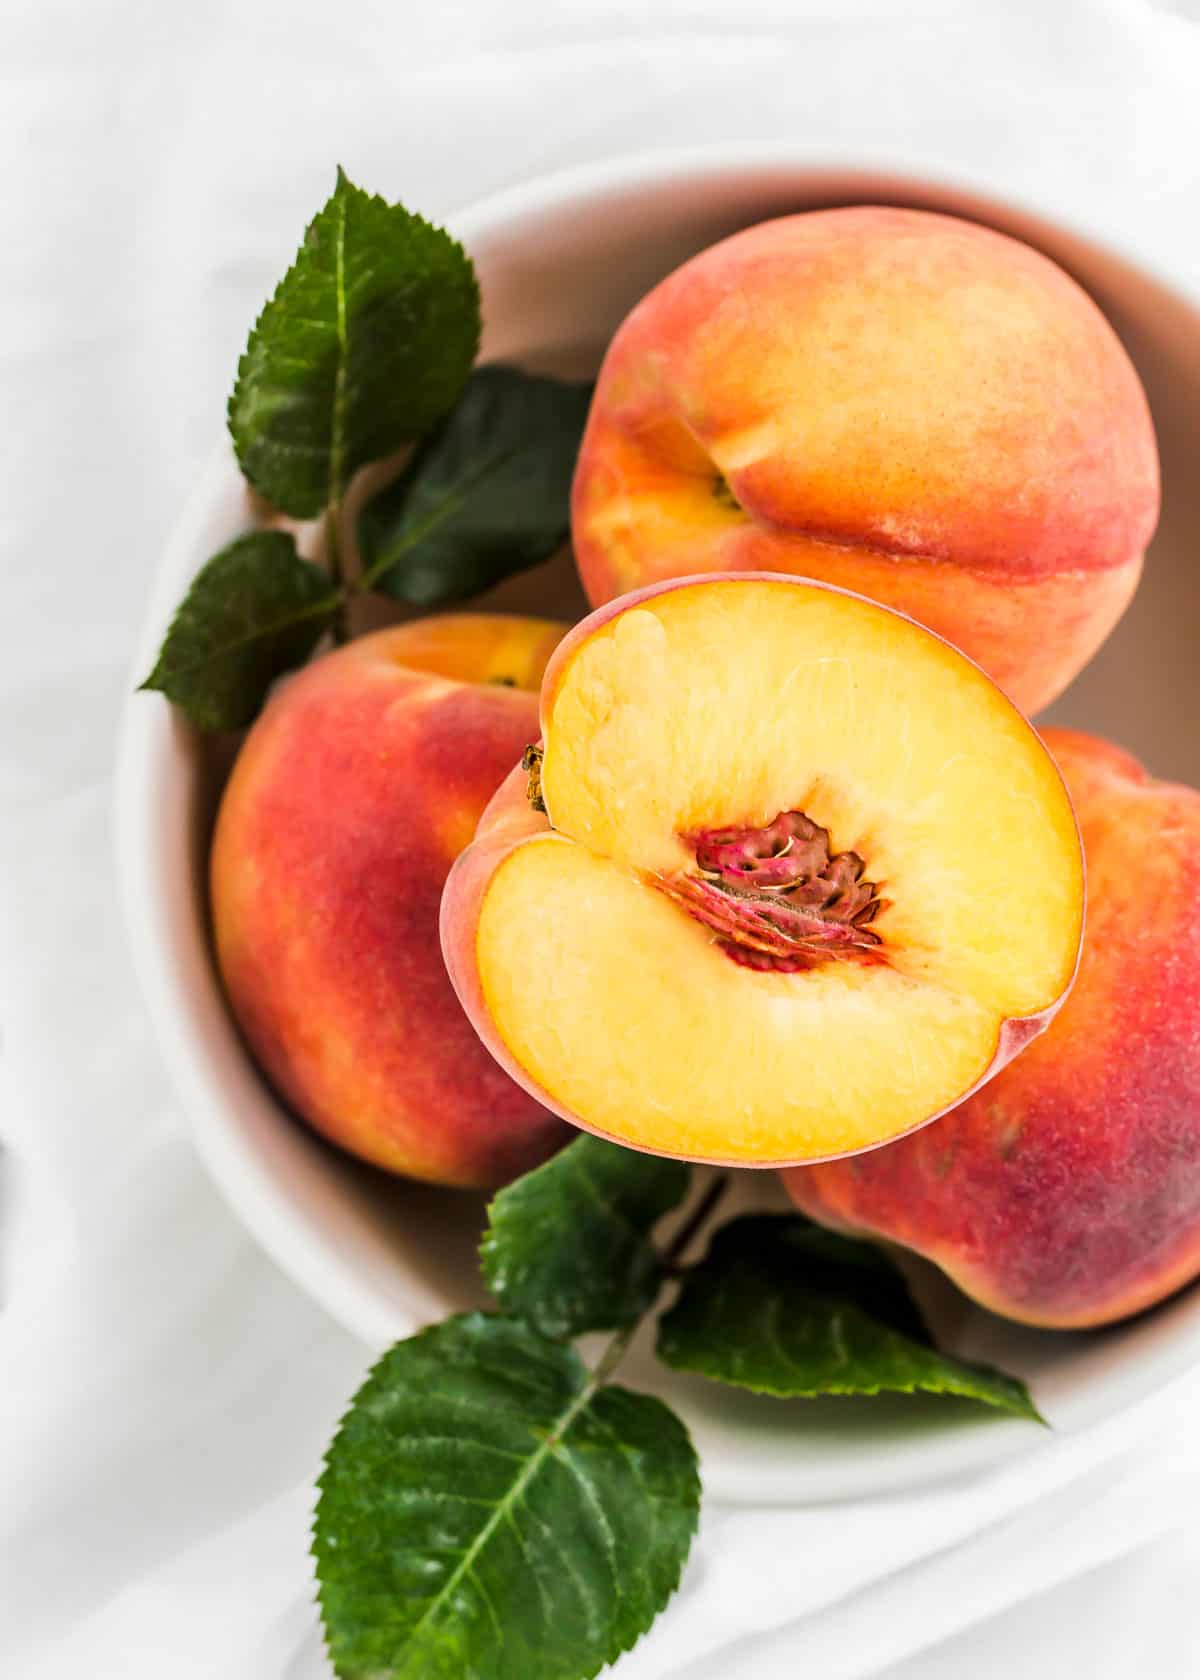 bowl of peaches with one peach sliced in half, overhead view.